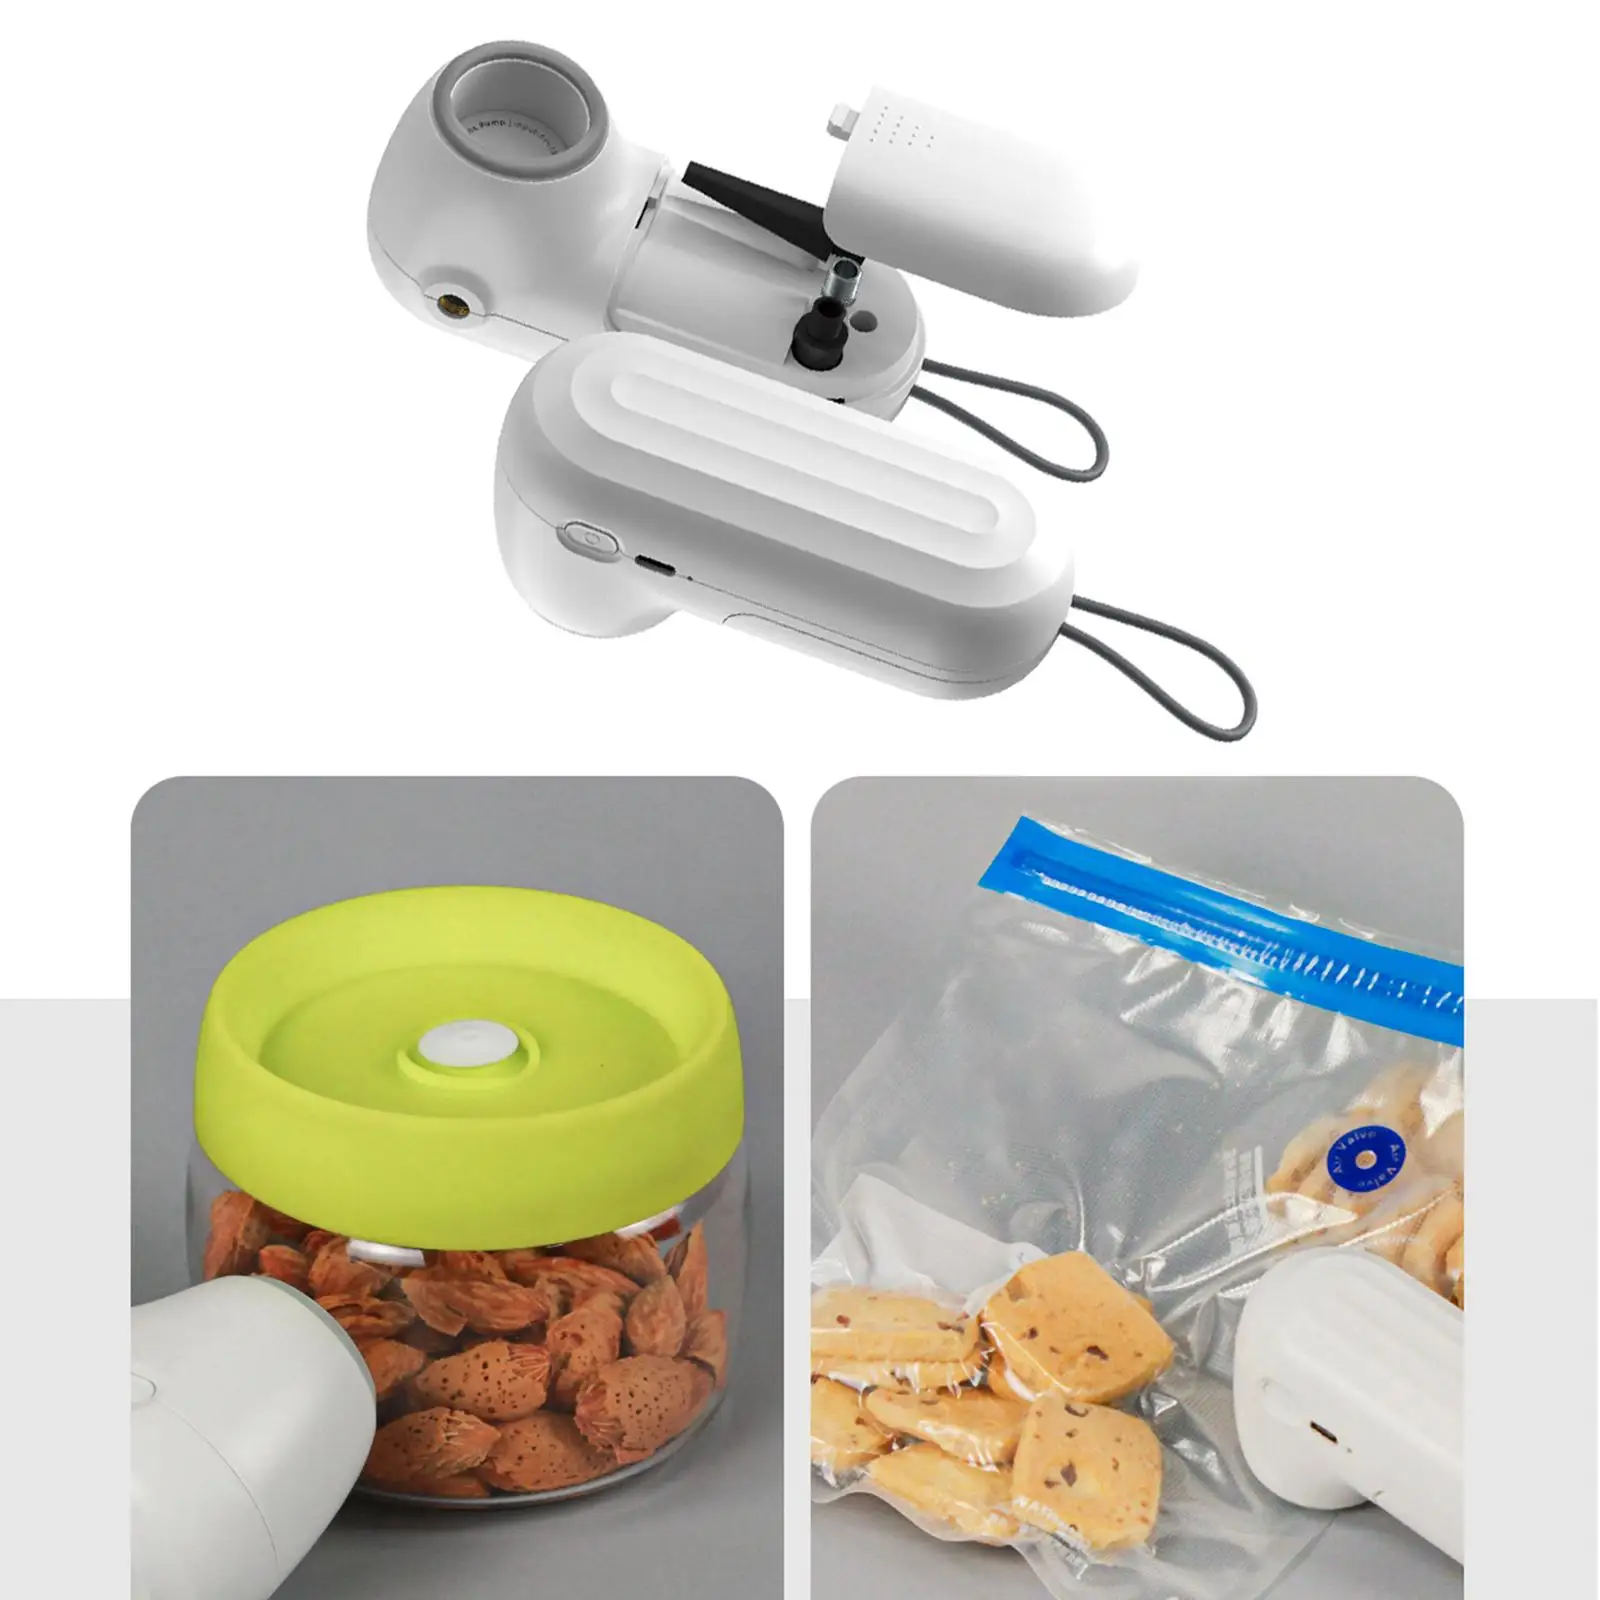 USB Electric Food Vacuum Machine Fast and Powerful Air Inflation & Deflation Handheld Vacuum Pump for Valved Vacuum Bags Kitchen